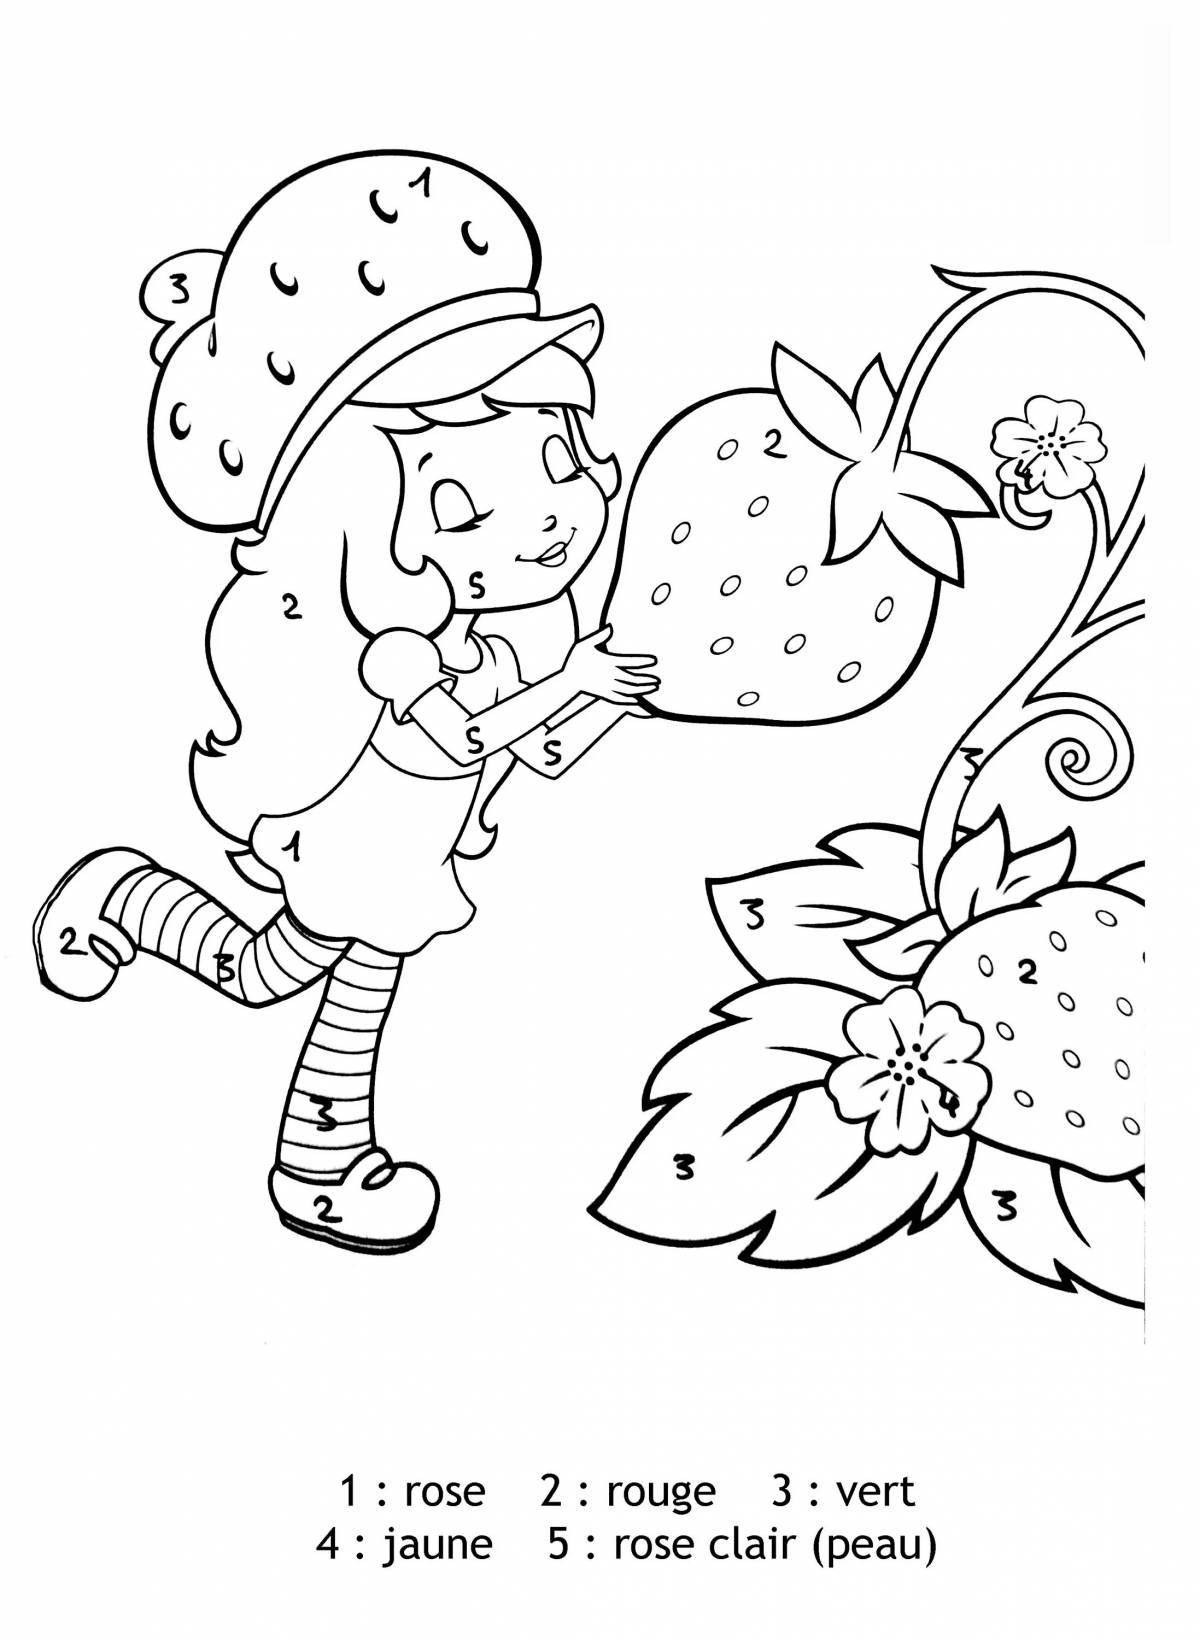 Funny strawberry coloring book for kids